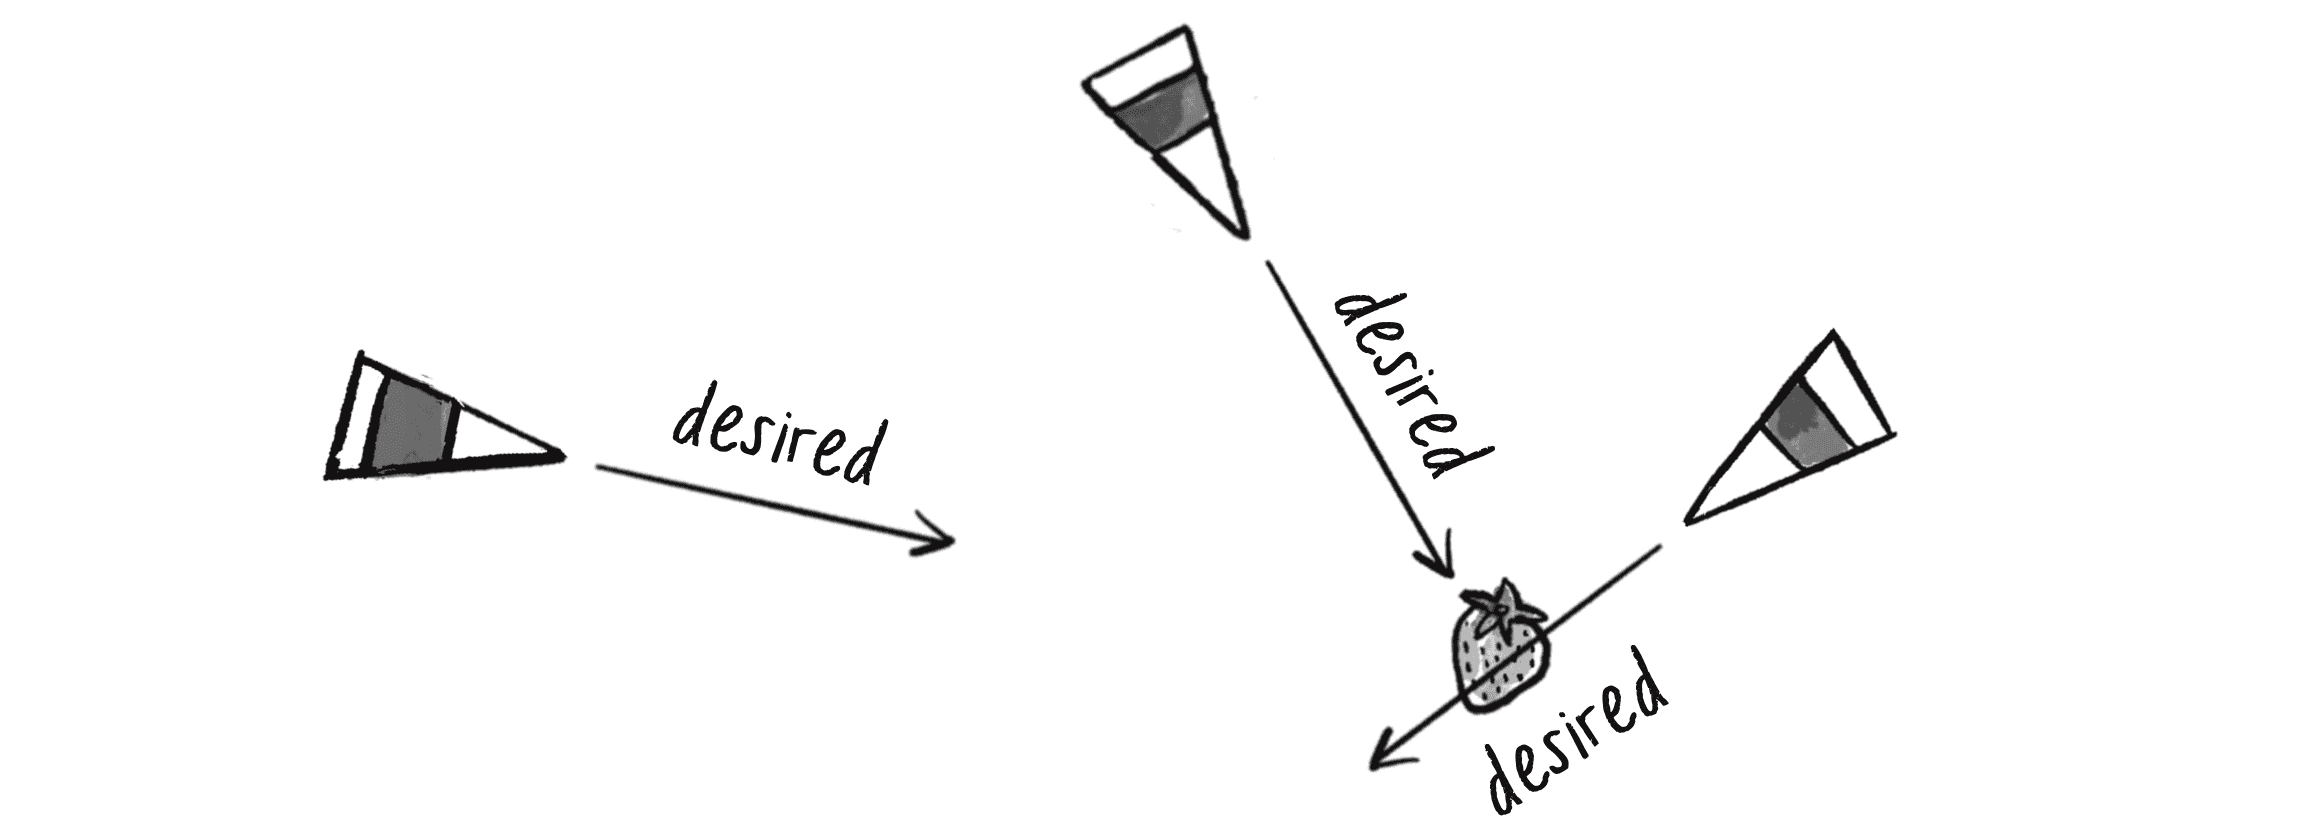 Figure 5.7: The vehicles have a desired velocity with a magnitude set to maximum speed, regardless of their relative distance to the target.